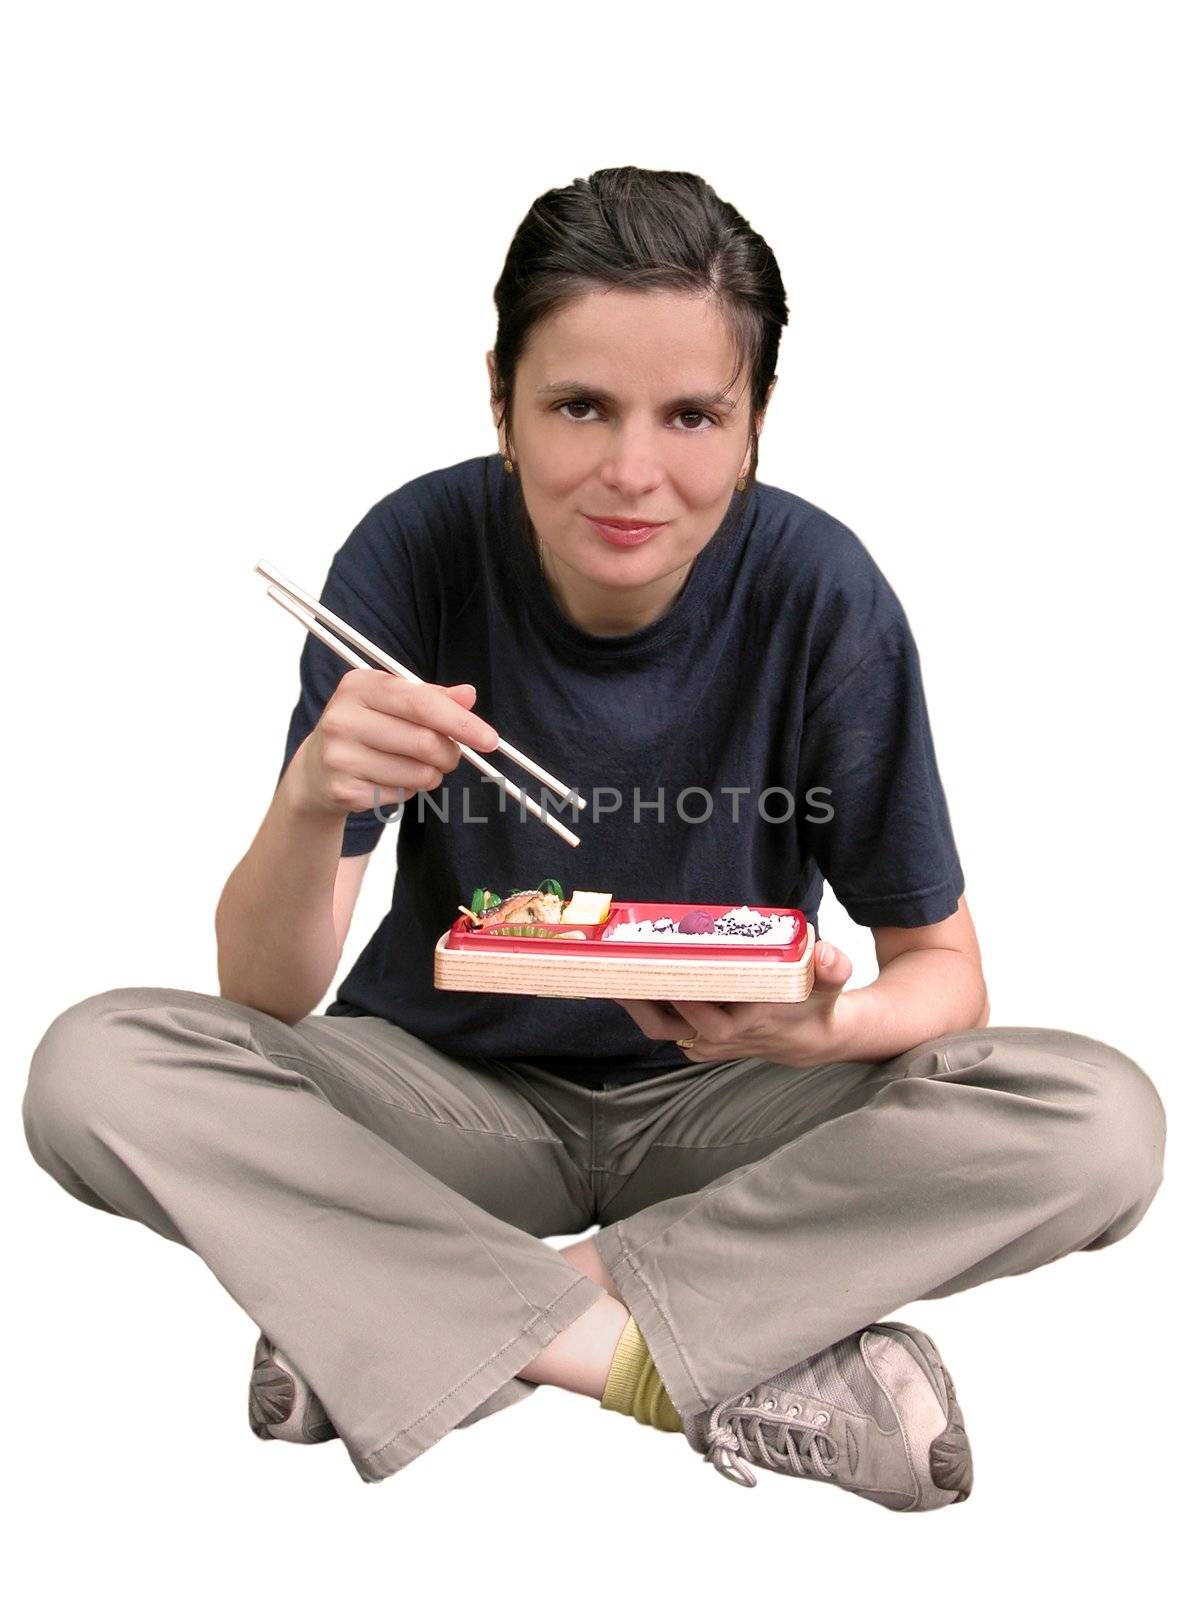 Casual non asian woman eating Japanese food usin chopsticks -over white background          